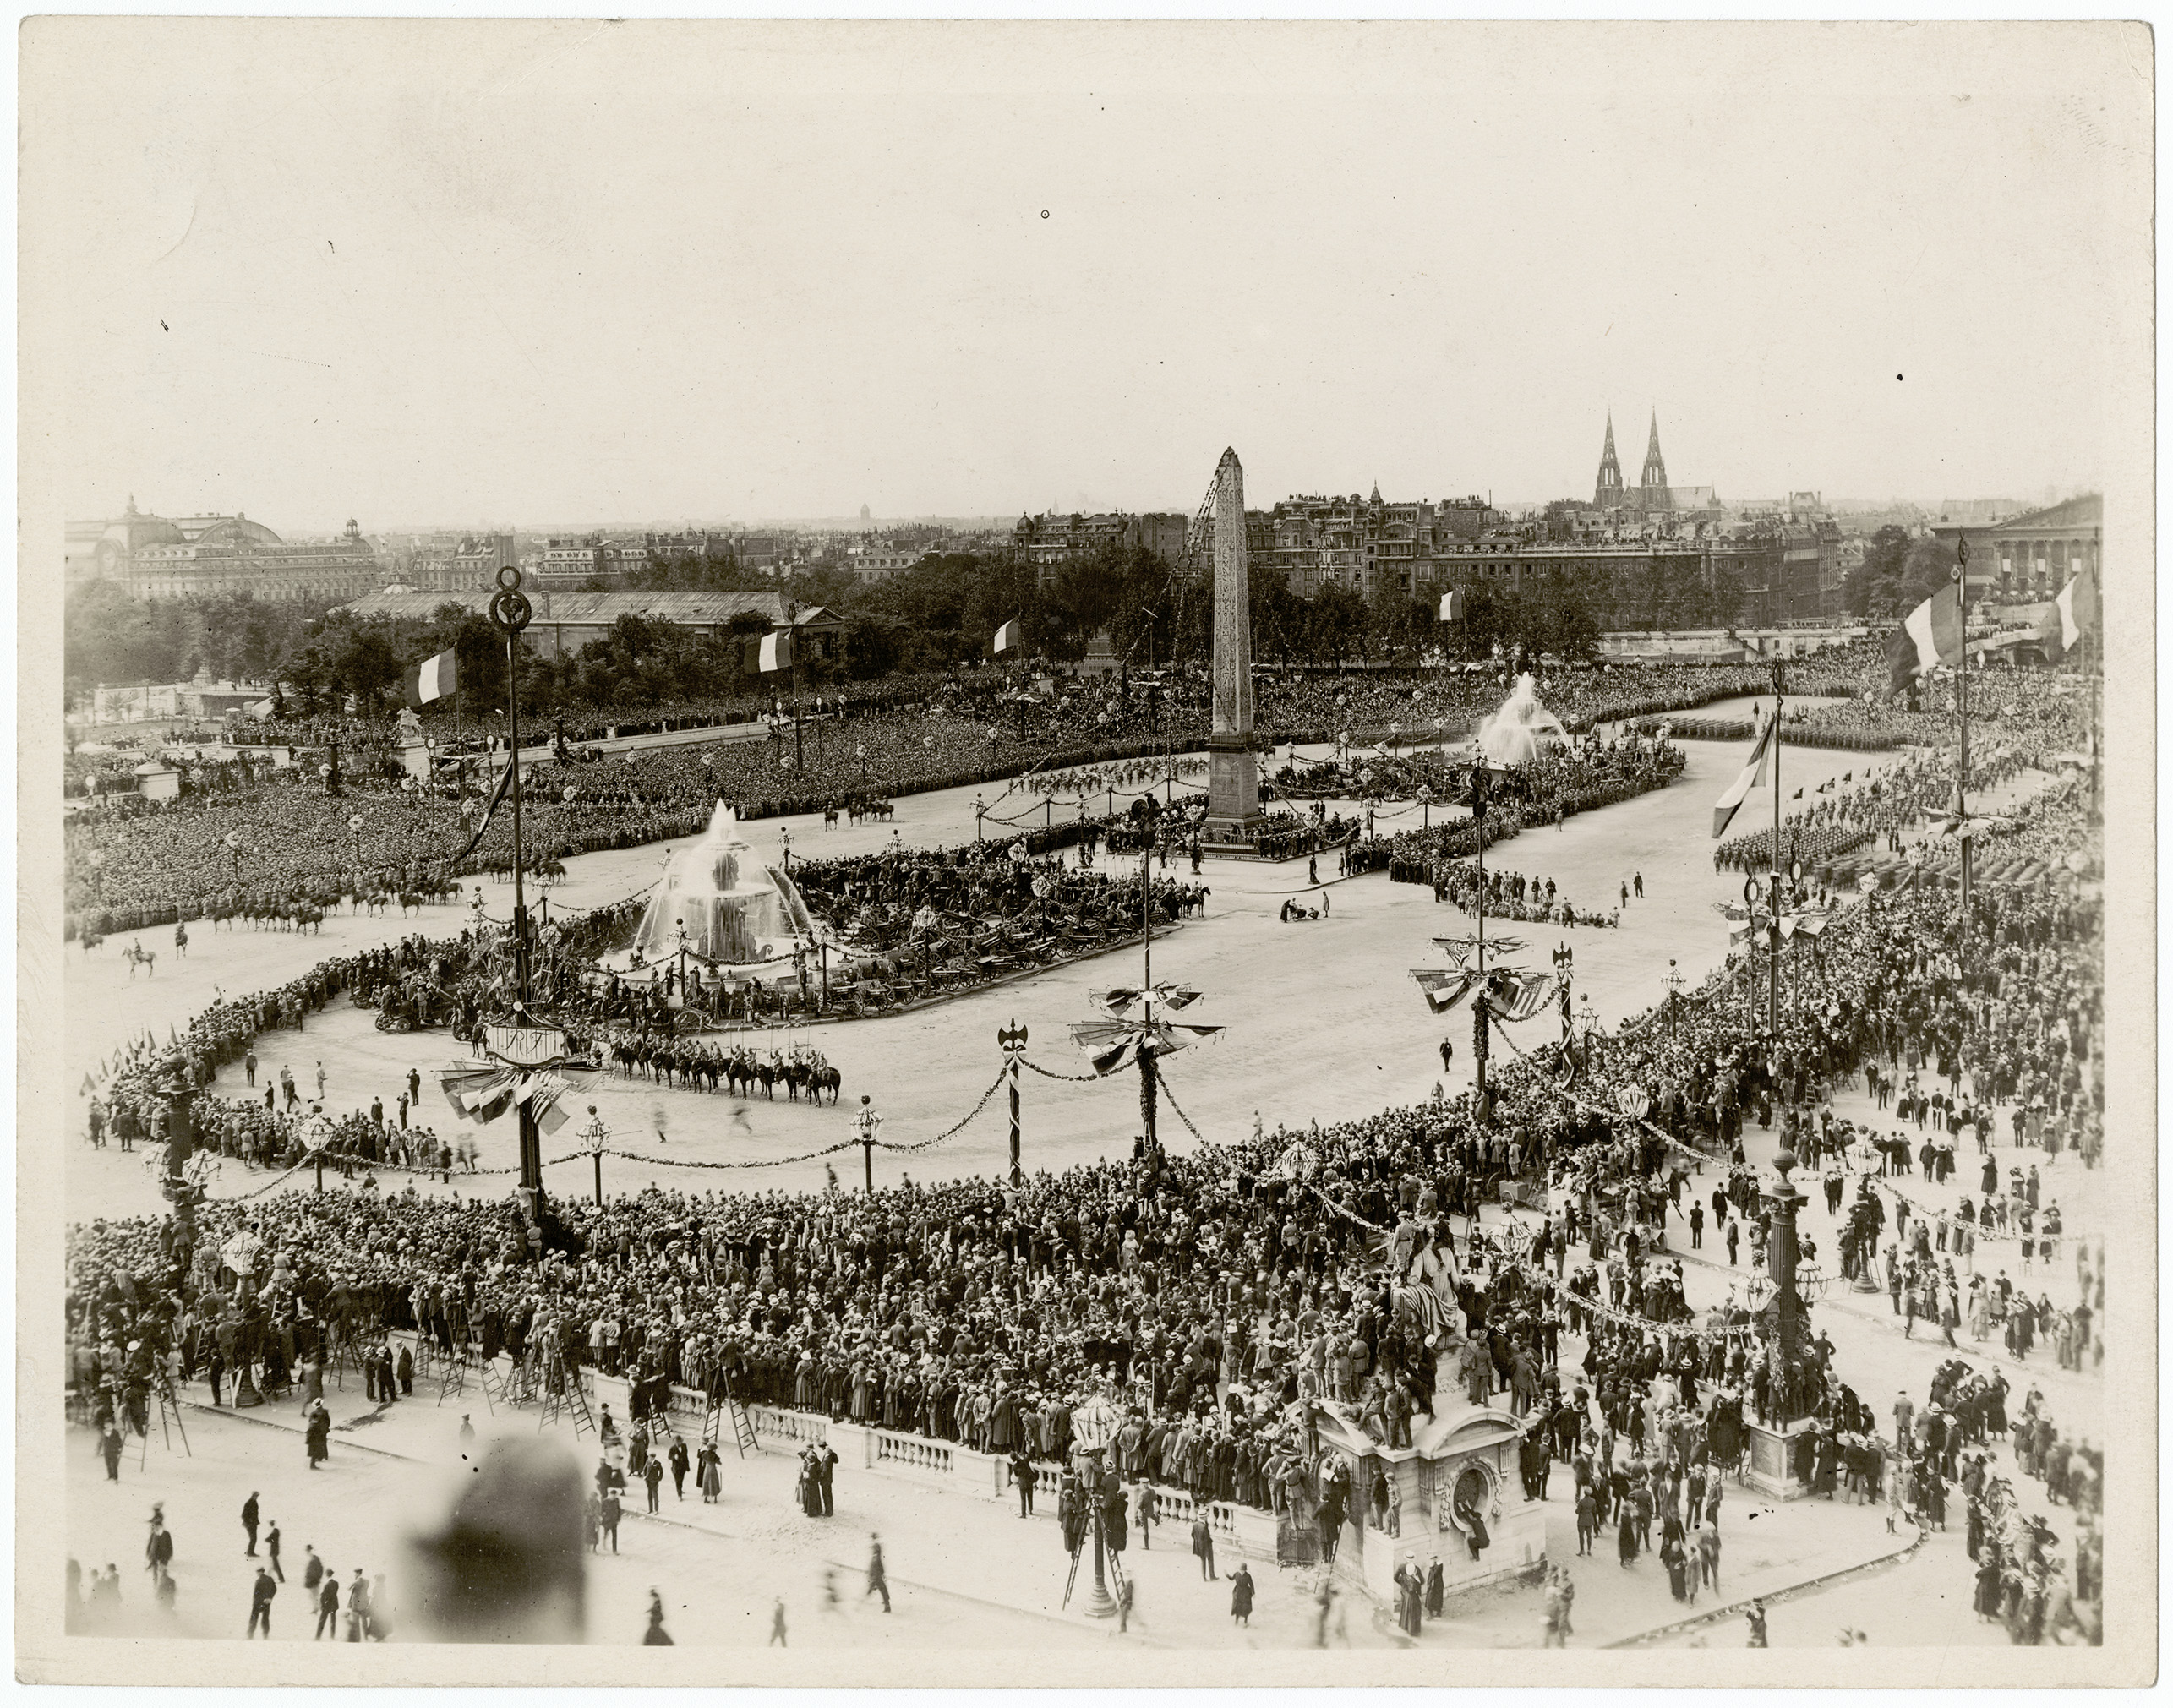 View of the victory celebration on Bastille Day in the Place de la Concorde in Paris, France, June 14, 1918. The image was taken from the roof of the Hotel Crillon. (photo ms53_10_01_010)